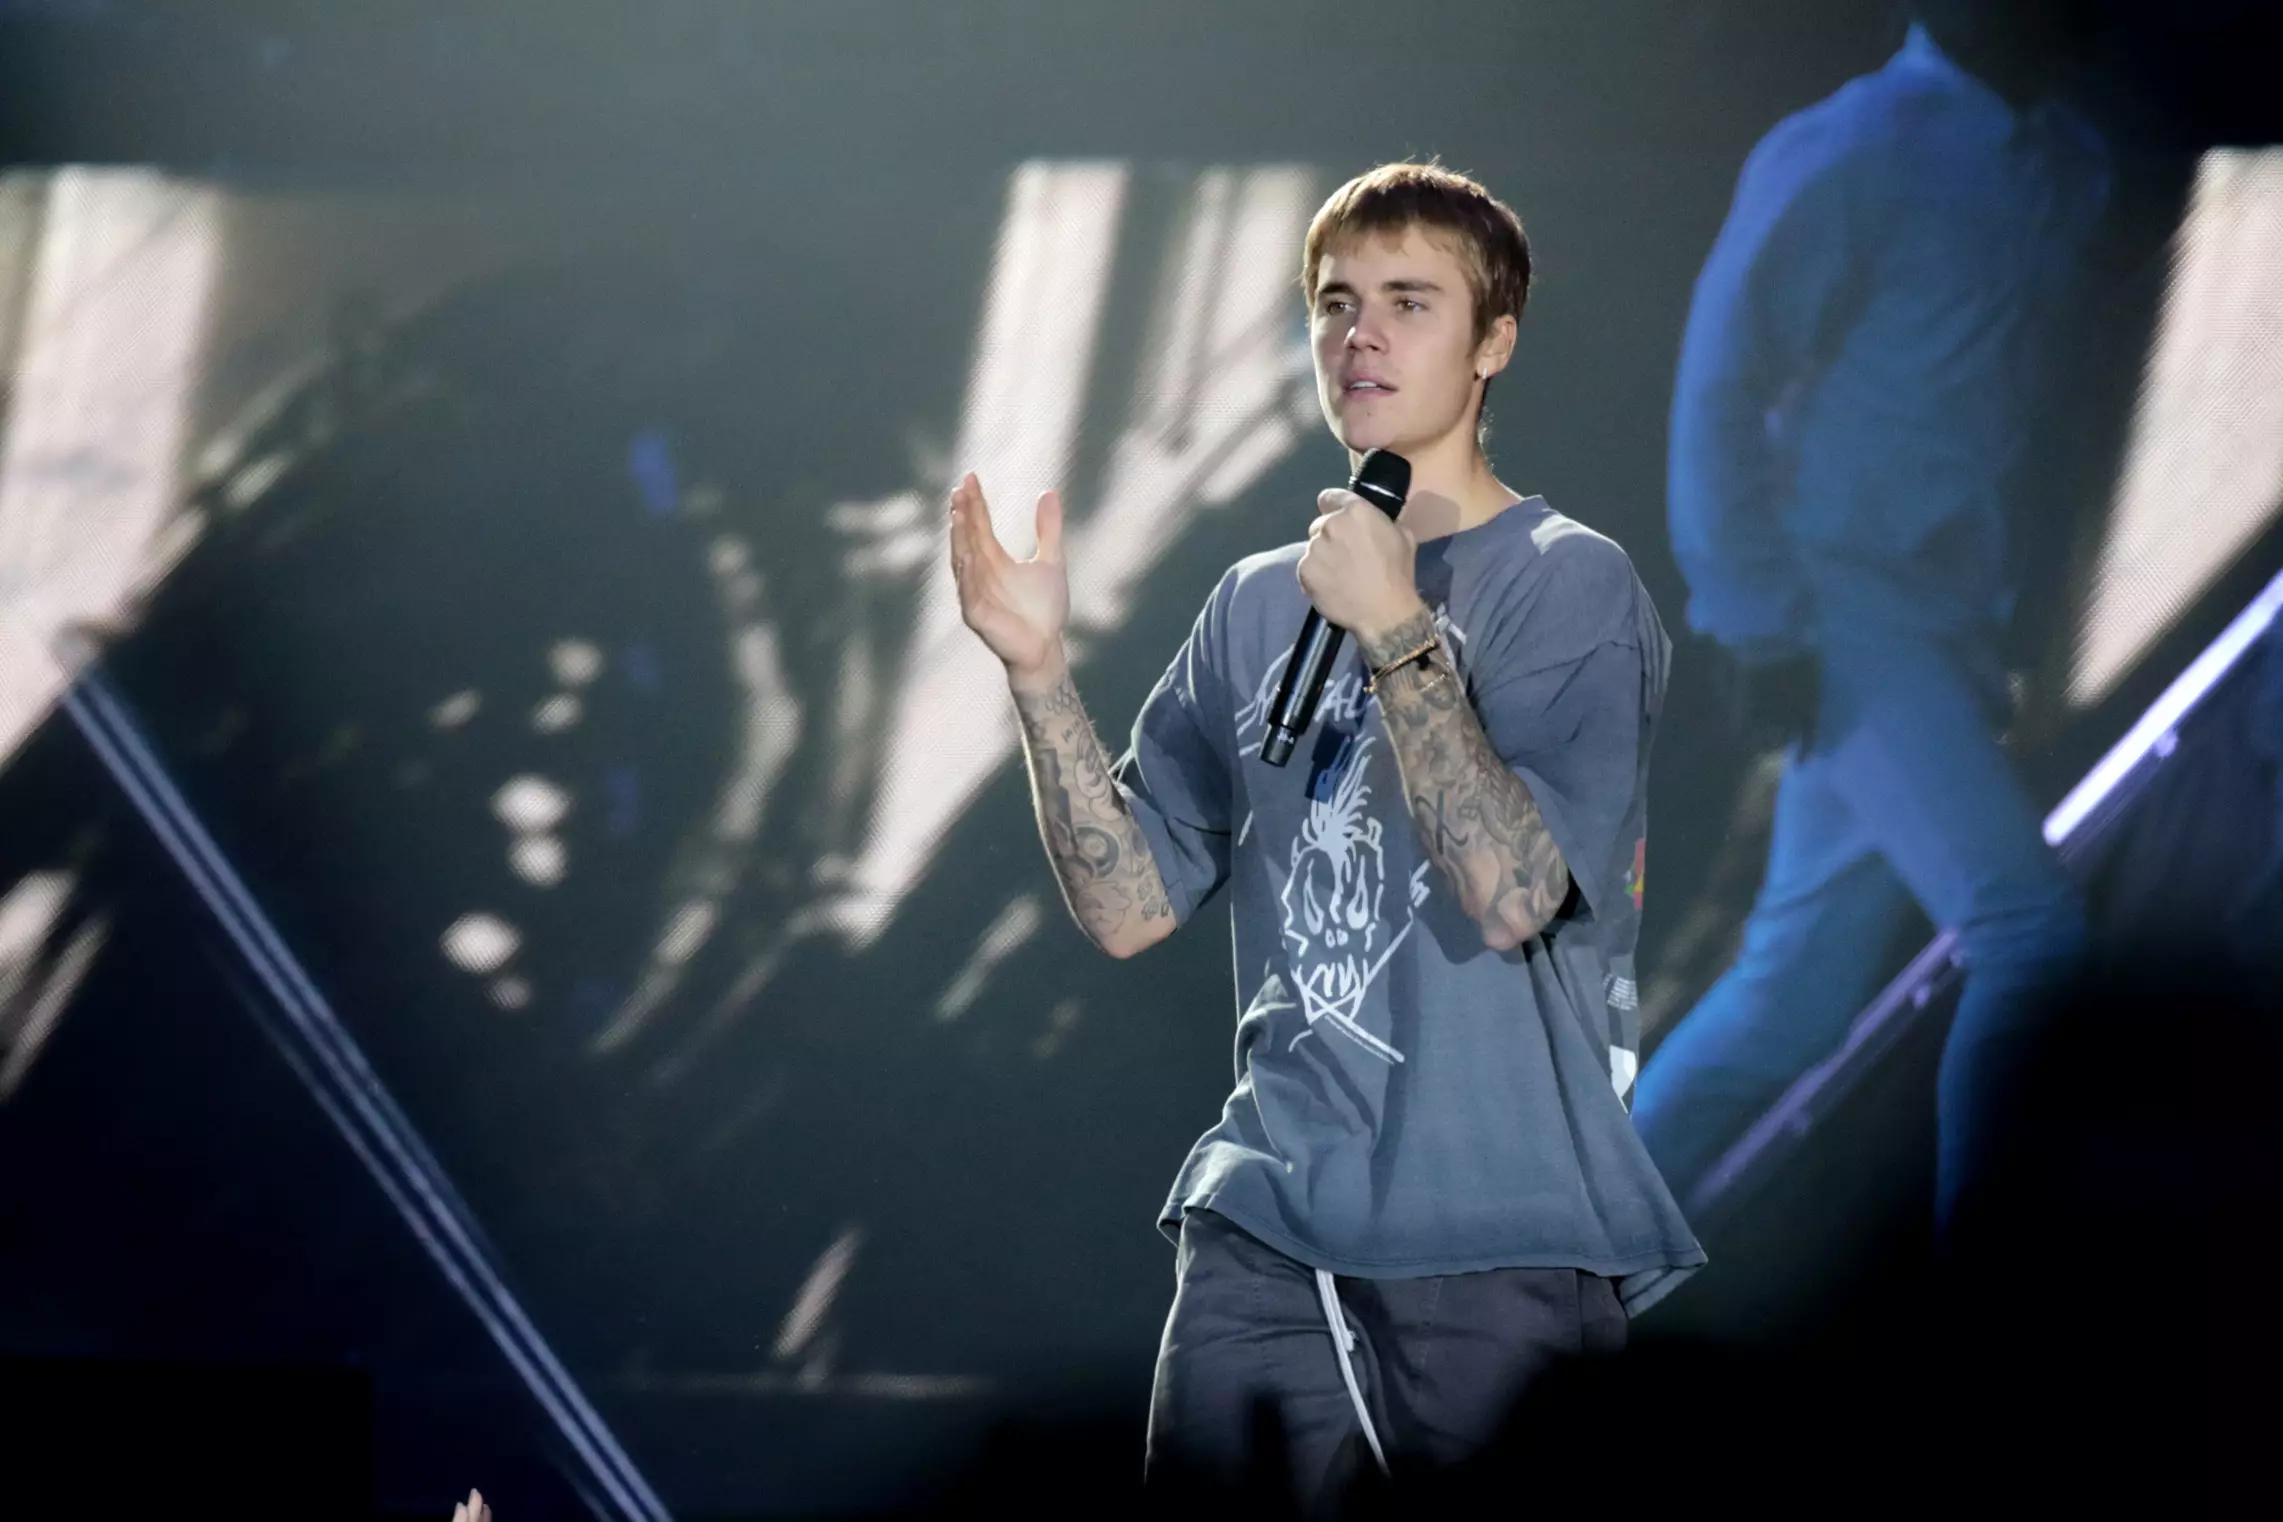 PETA claims Bieber 'doesn't care' about helping animals.